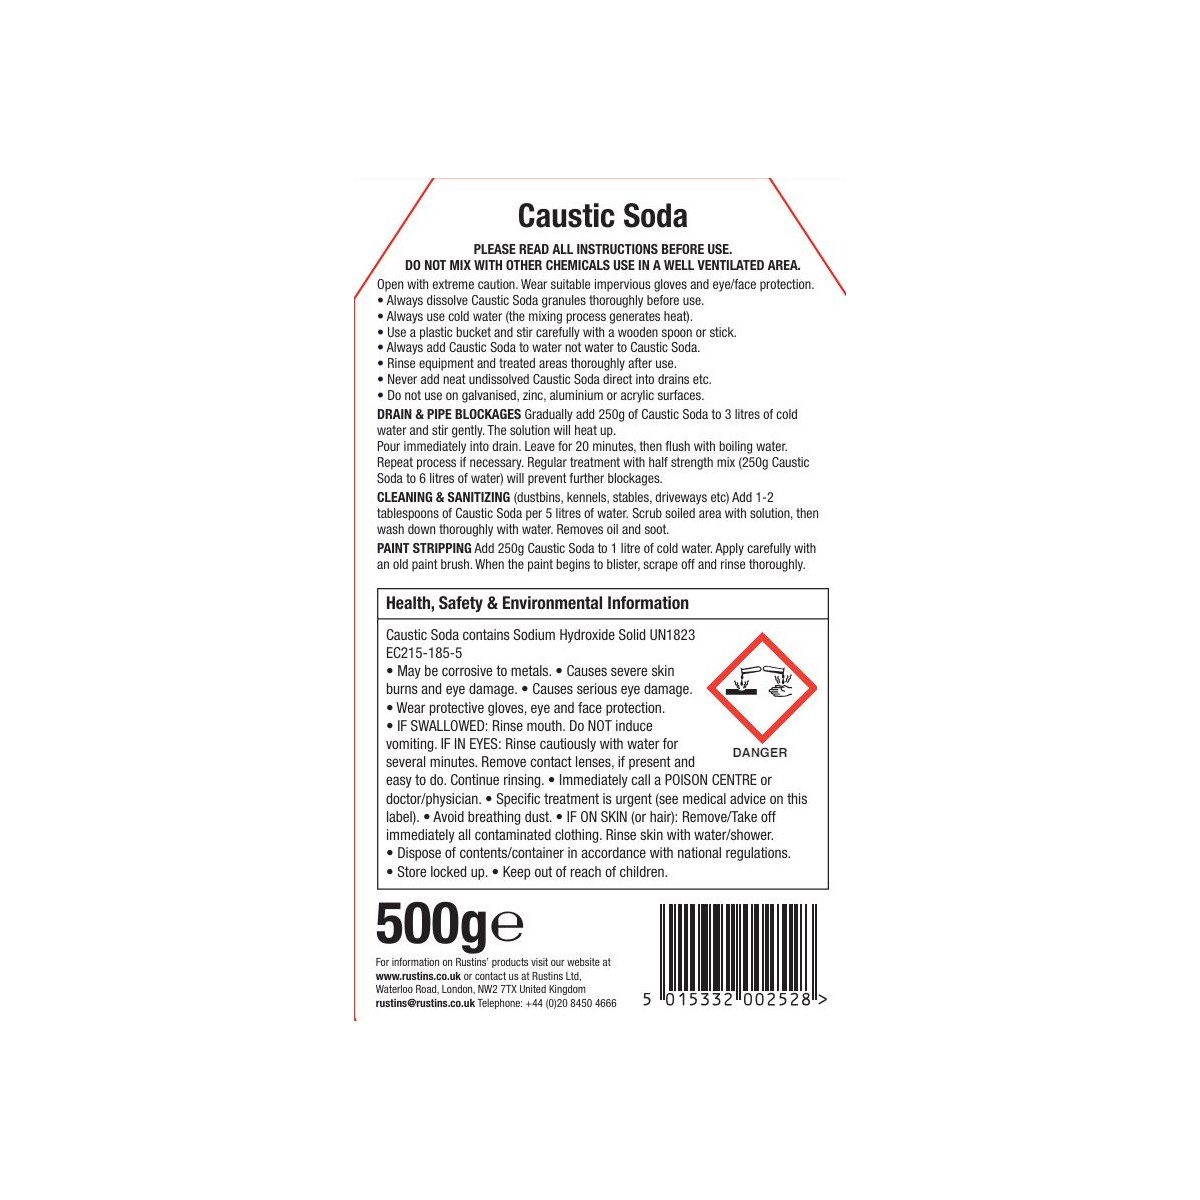 How to use Rustins Caustic Soda Granules 500g